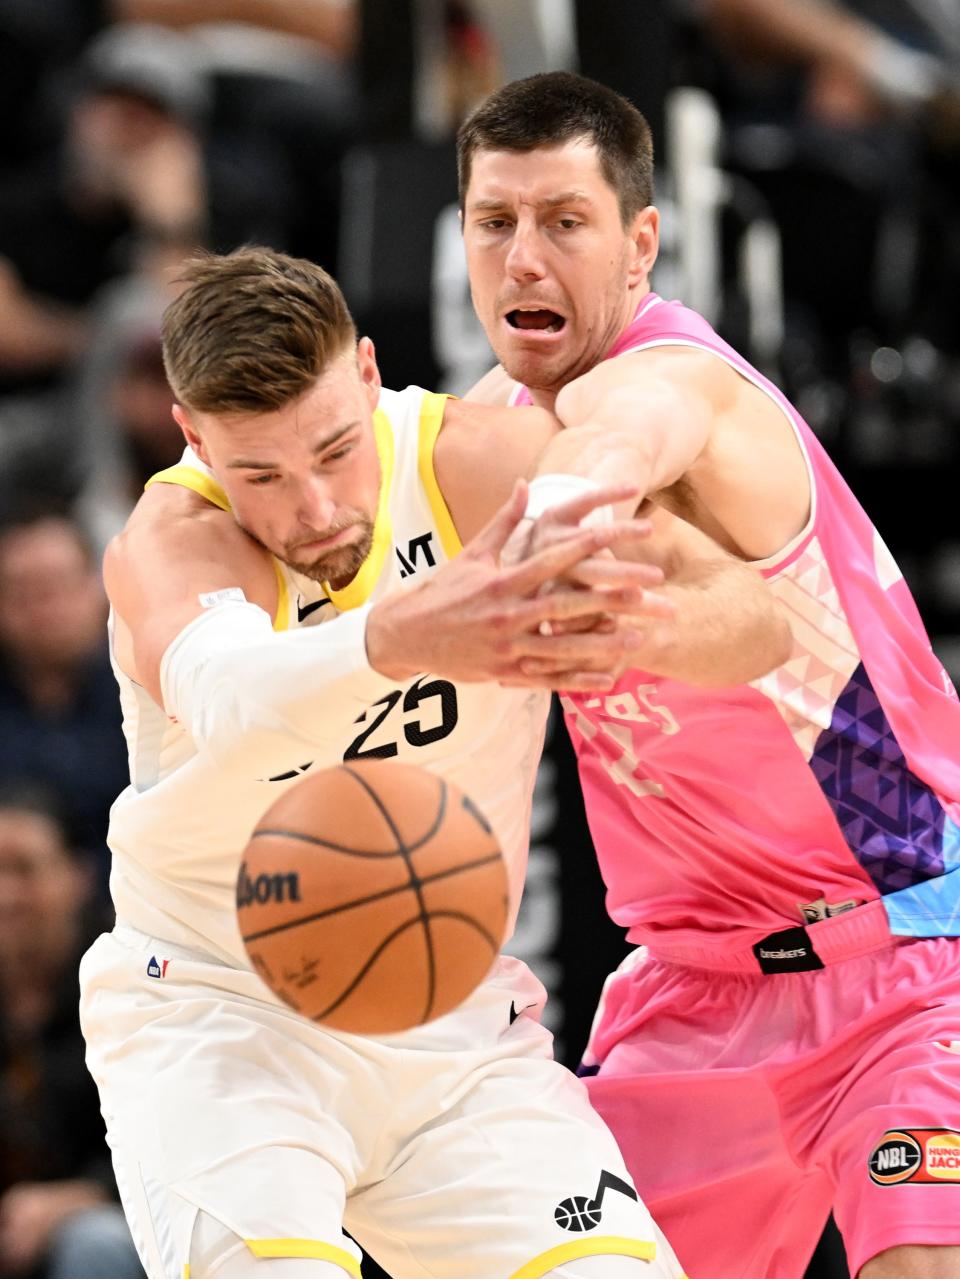 Utah Jazz center Micah Potter (25) fights to regain the ball as Breakers’ forward Dane Pineau (22) hits it away as the Utah Jazz and the New Zealand Breakers play at the Delta Center in Salt Lake City on Monday, Oct. 16, 2023. Jazz won 114-94. | Scott G Winterton, Deseret News